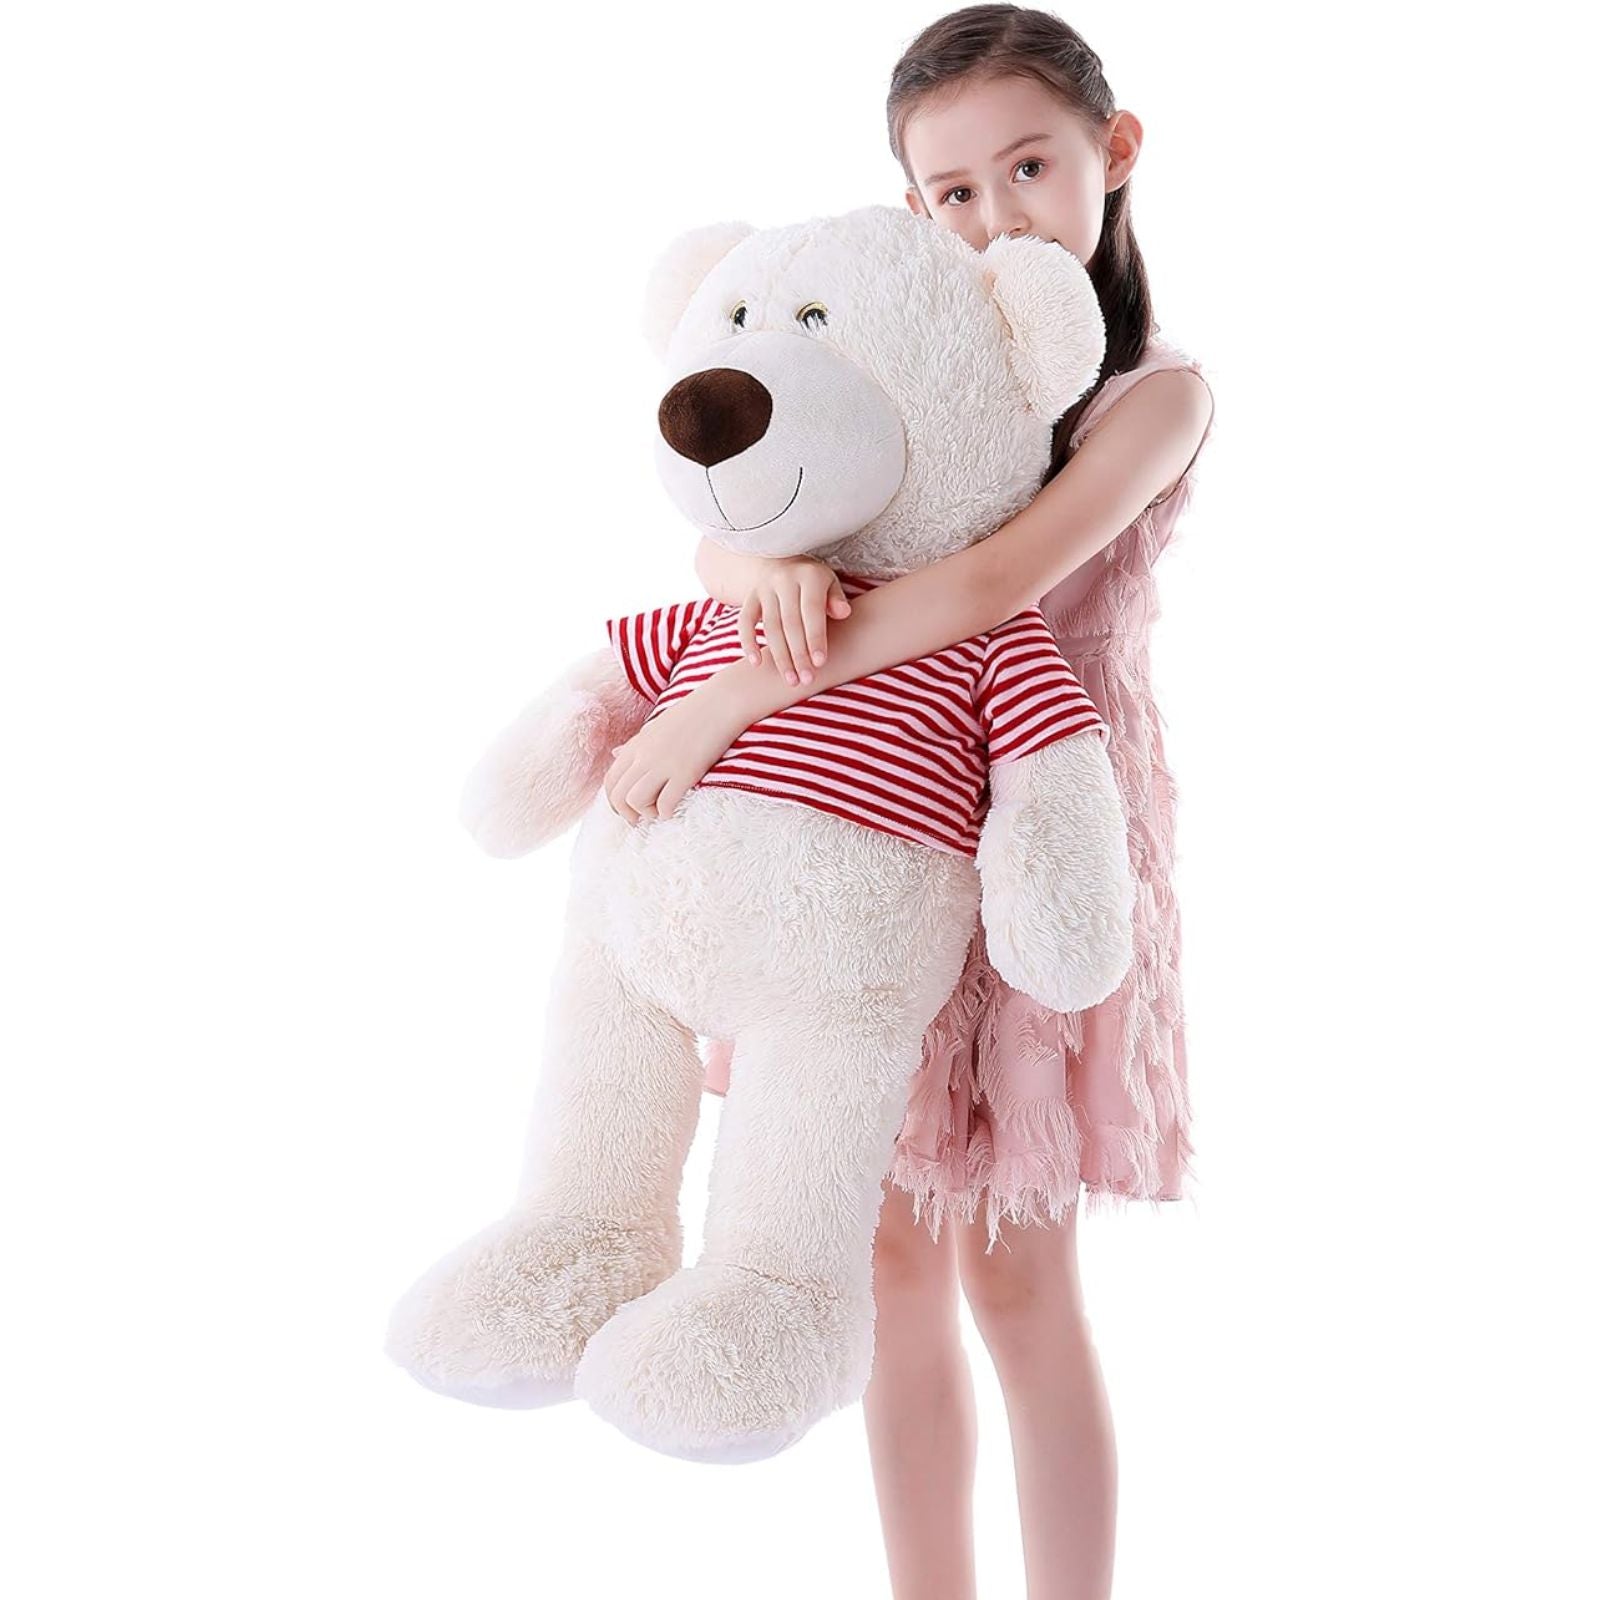 Buy Quty Teddy Bear - Cream Big Size Teddy Bear for Kids, Girls & Children  Gifting, Girls Playing & Couples Gift in 70 cm Long Online at Low Prices in  India - Amazon.in